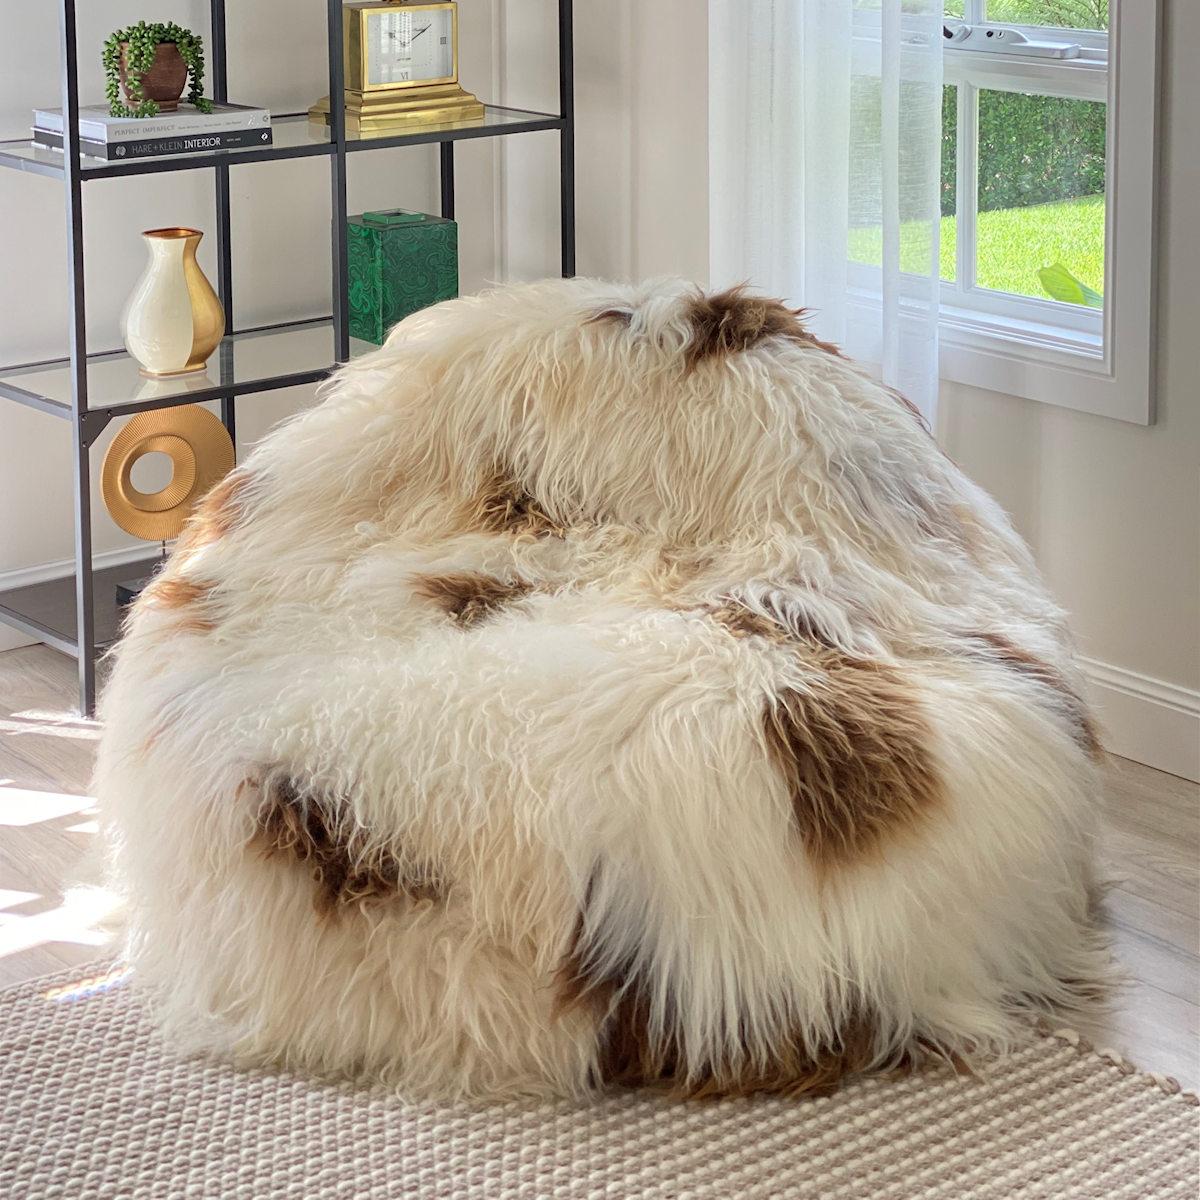 Imagine relaxing into this designer, shaggy sheepskin beanbag while unwinding after a long and tiring day. This extra large and enchanting shaggy bean bag is currently available only as limited edition piece with only 2 available of its kind. Each